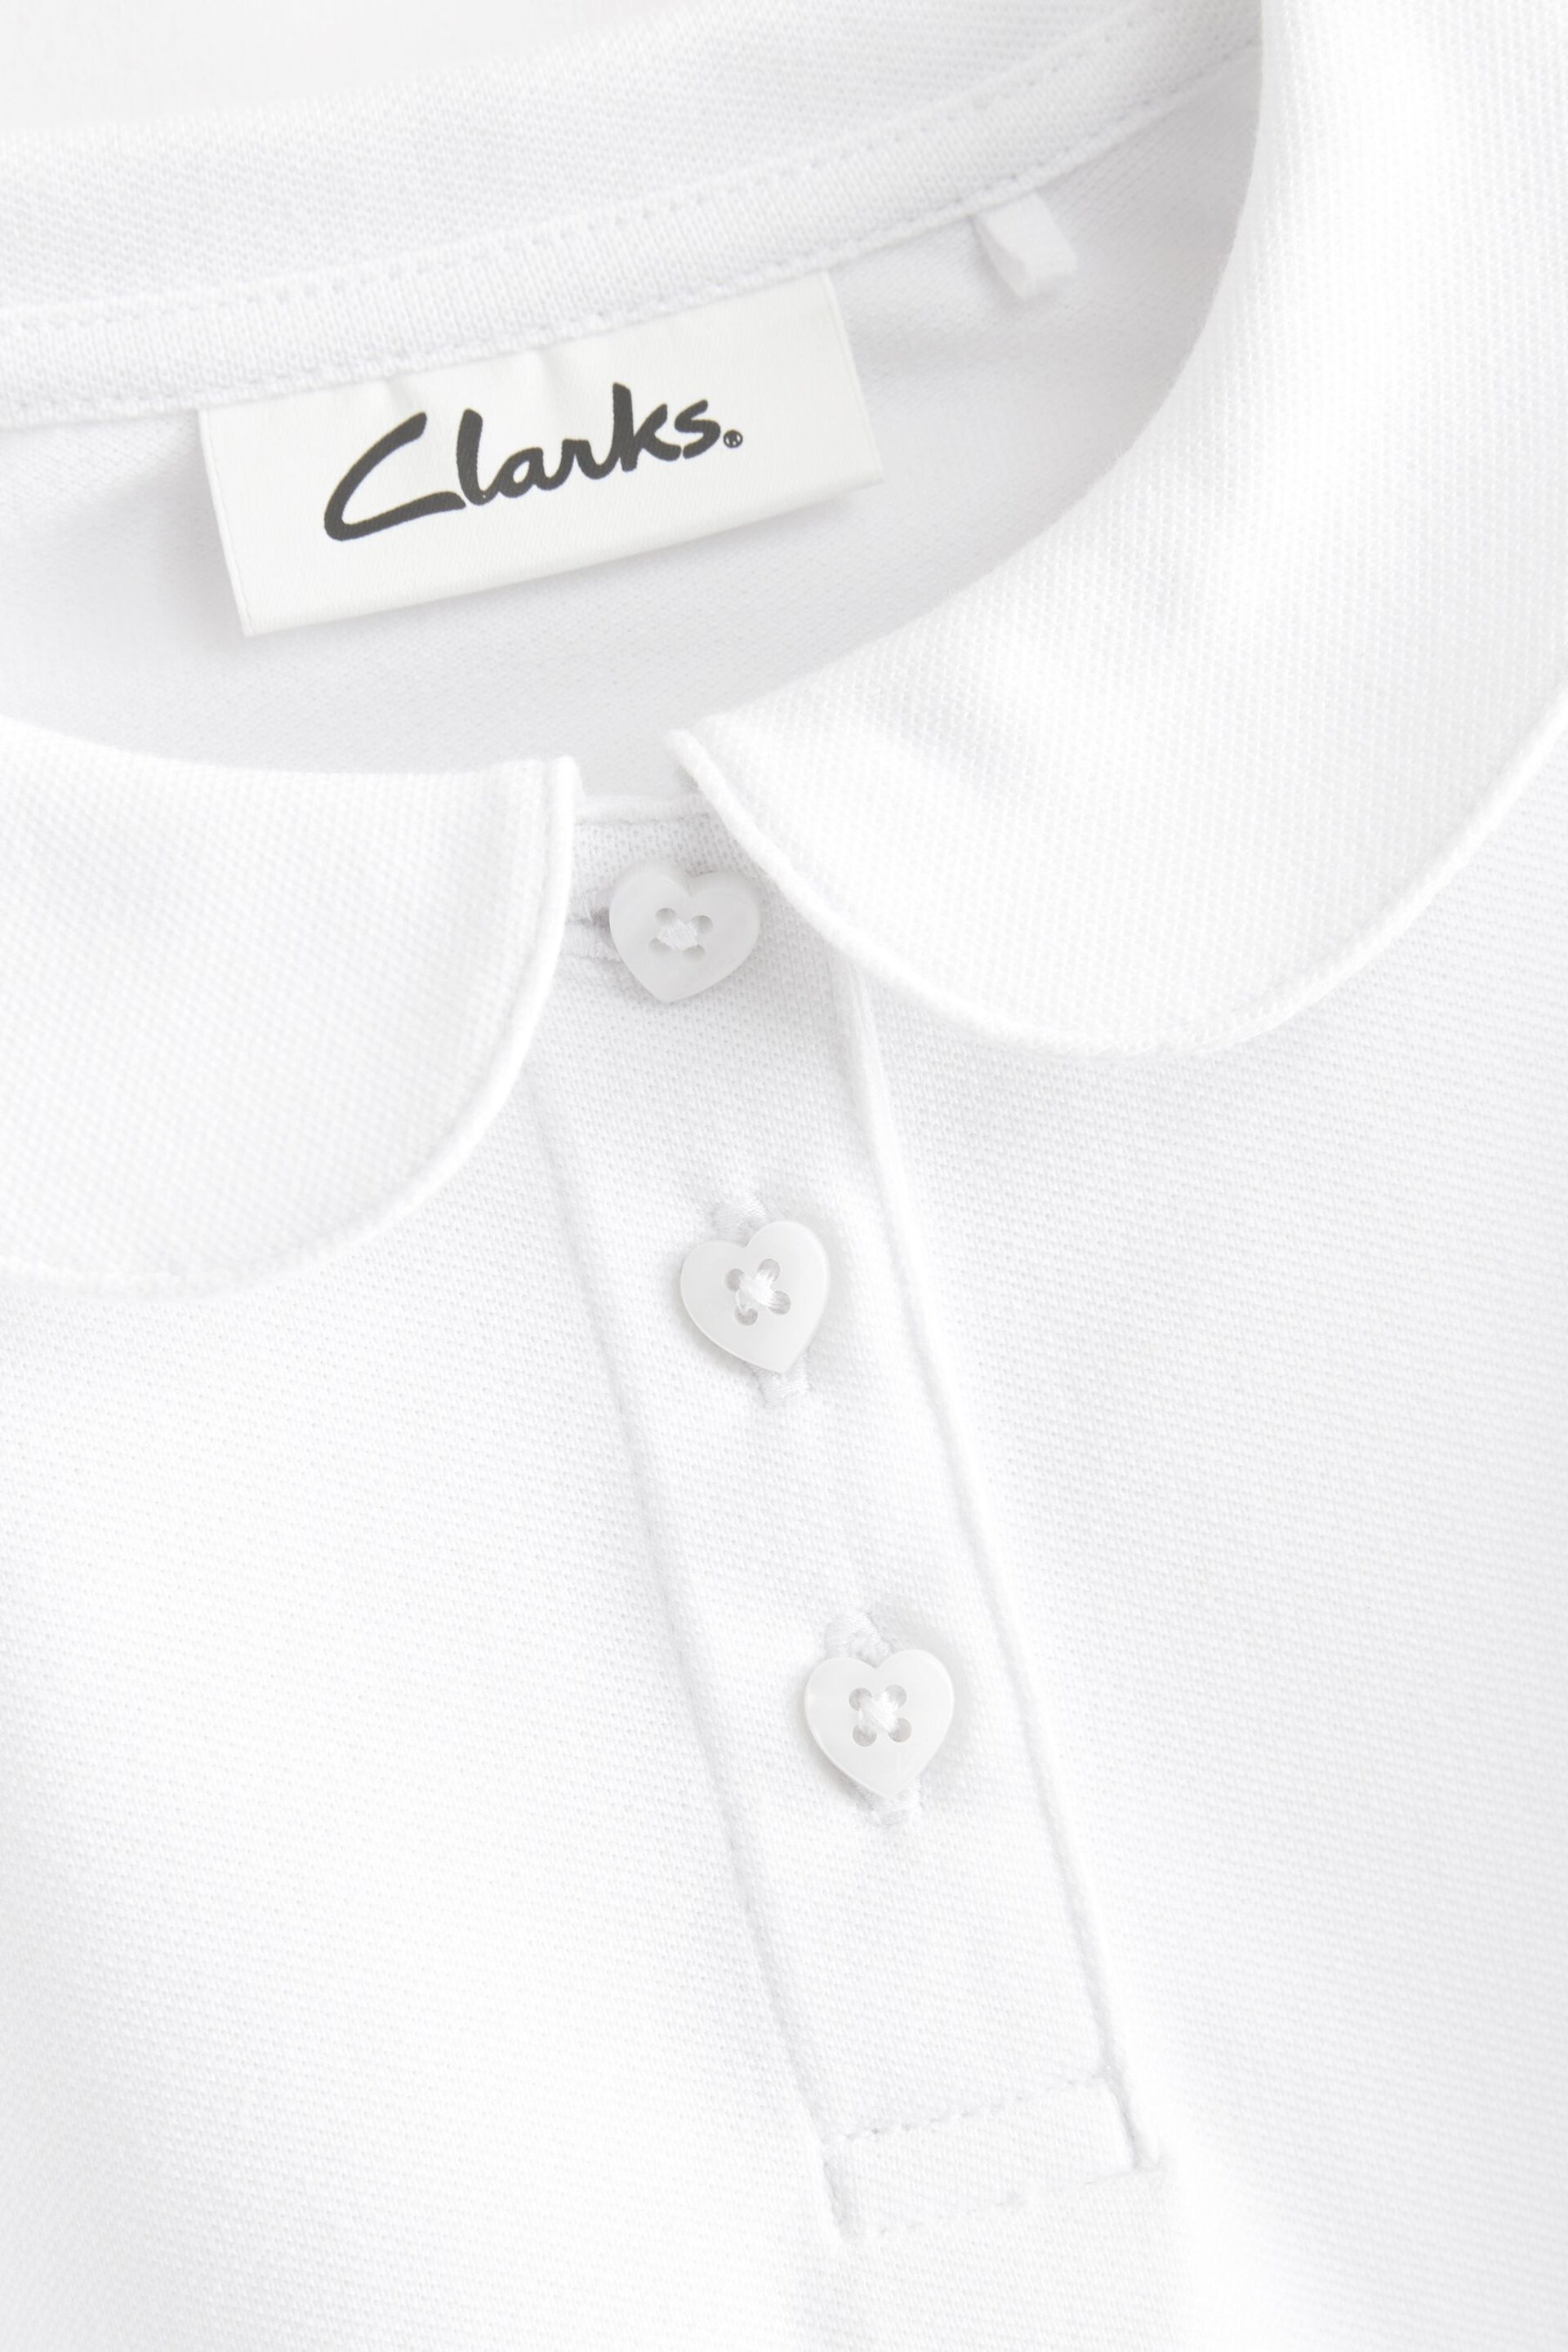 Clarks White Ground Girls School Short Sleeve Polo Shirts 2 Pack - Image 4 of 10